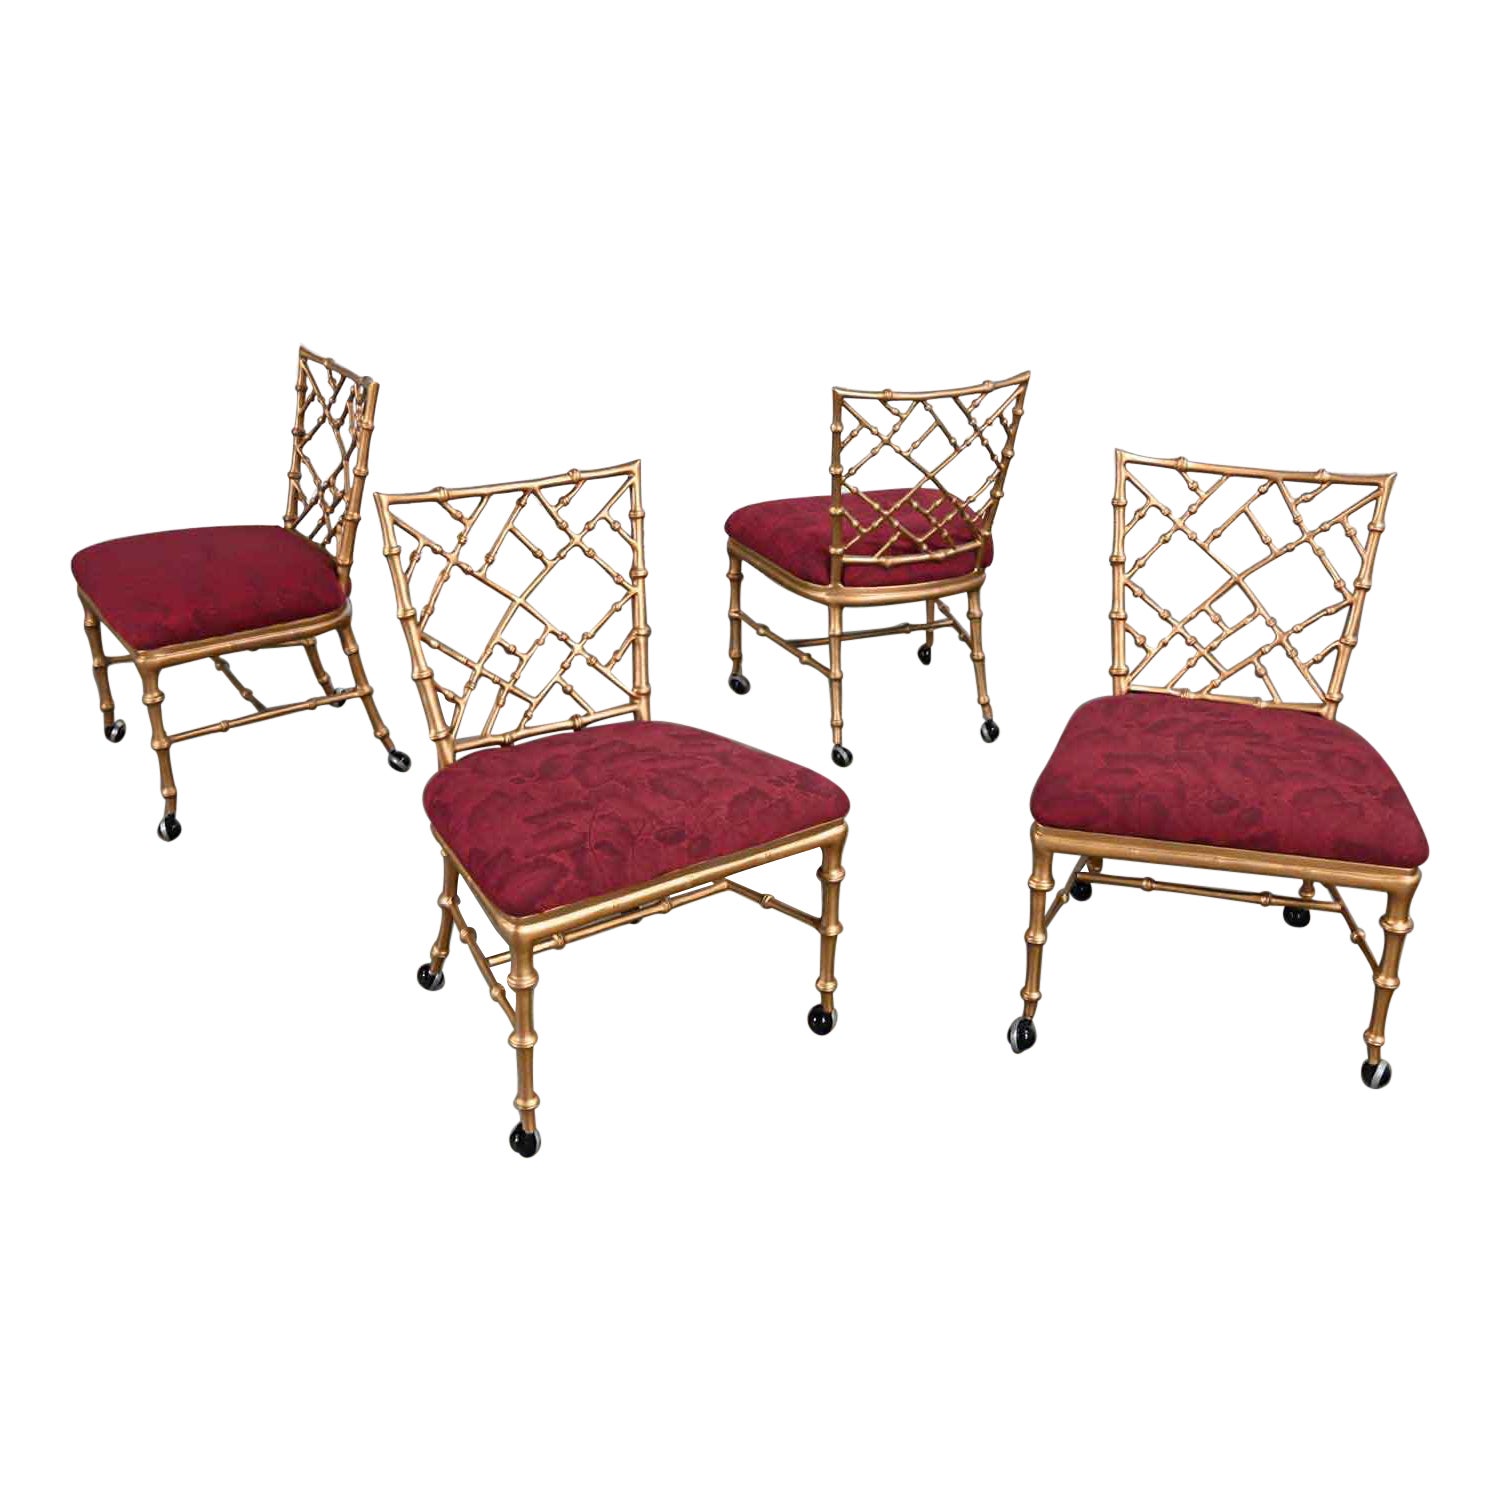 Chinoiserie Faux Bamboo Gold Painted Metal Chairs Rolling Style Phyllis Morris For Sale